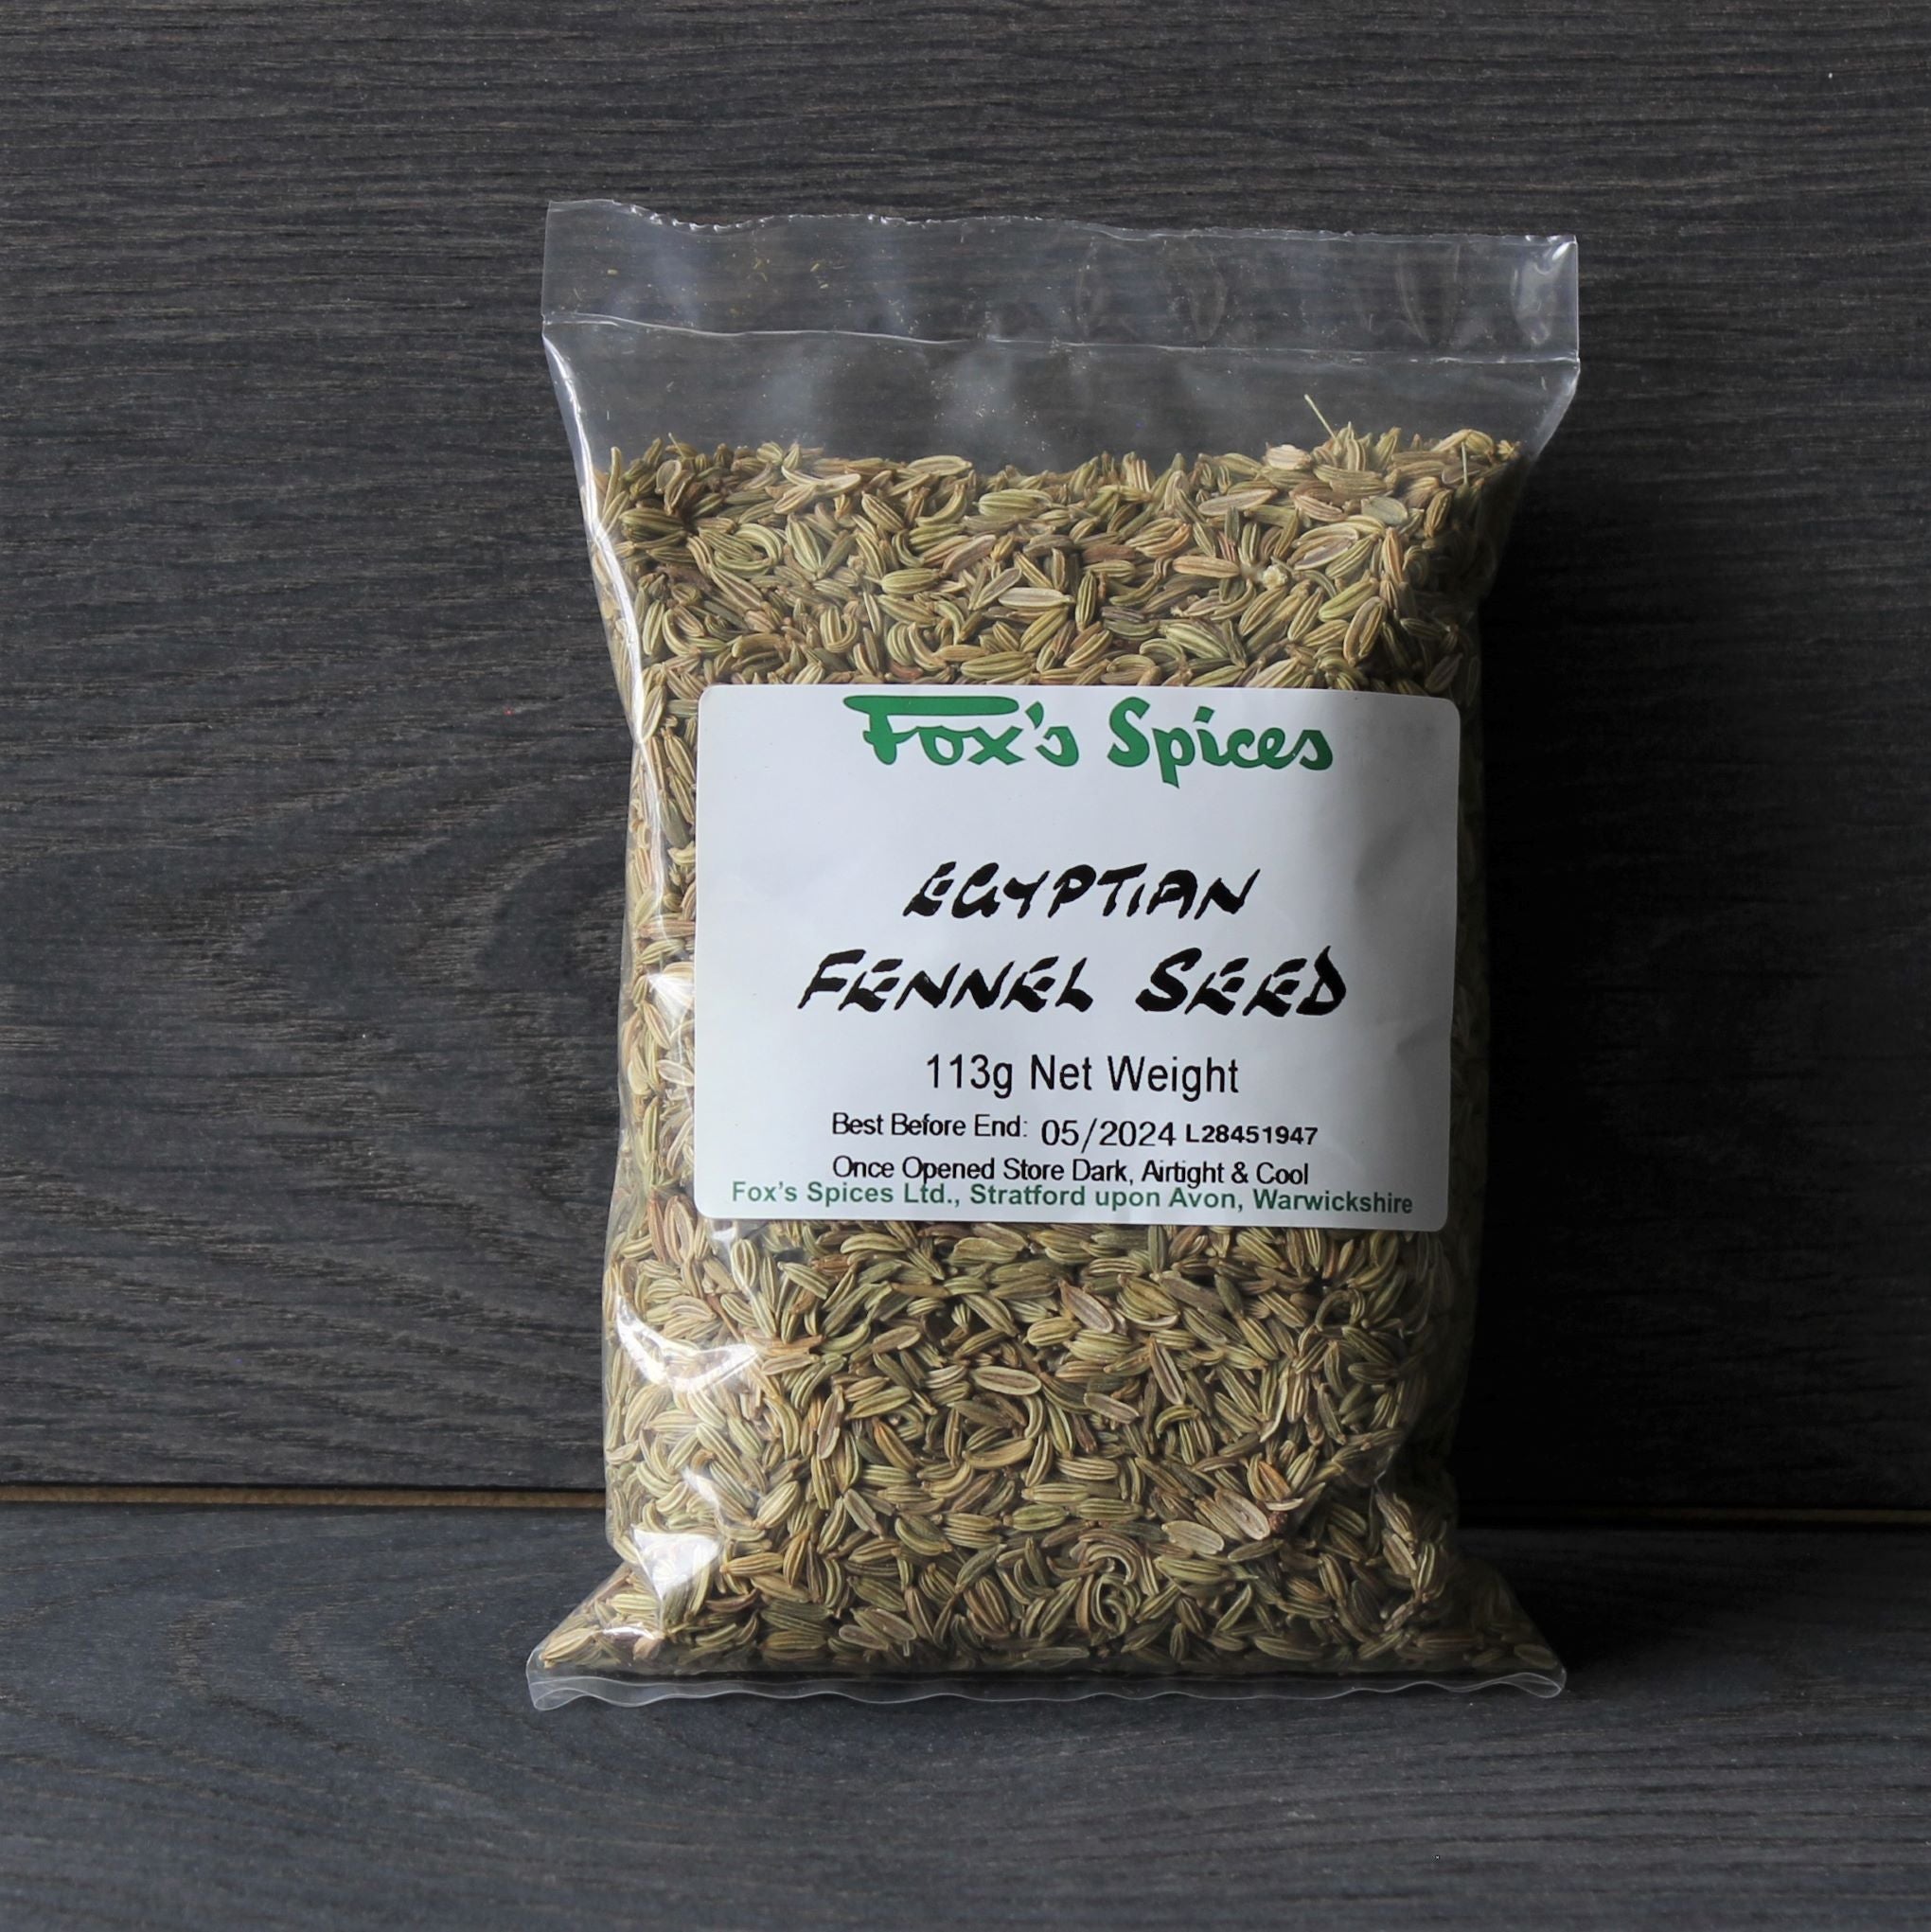 A 113g bag of Fox's Spices Egyptian Fennel Seeds